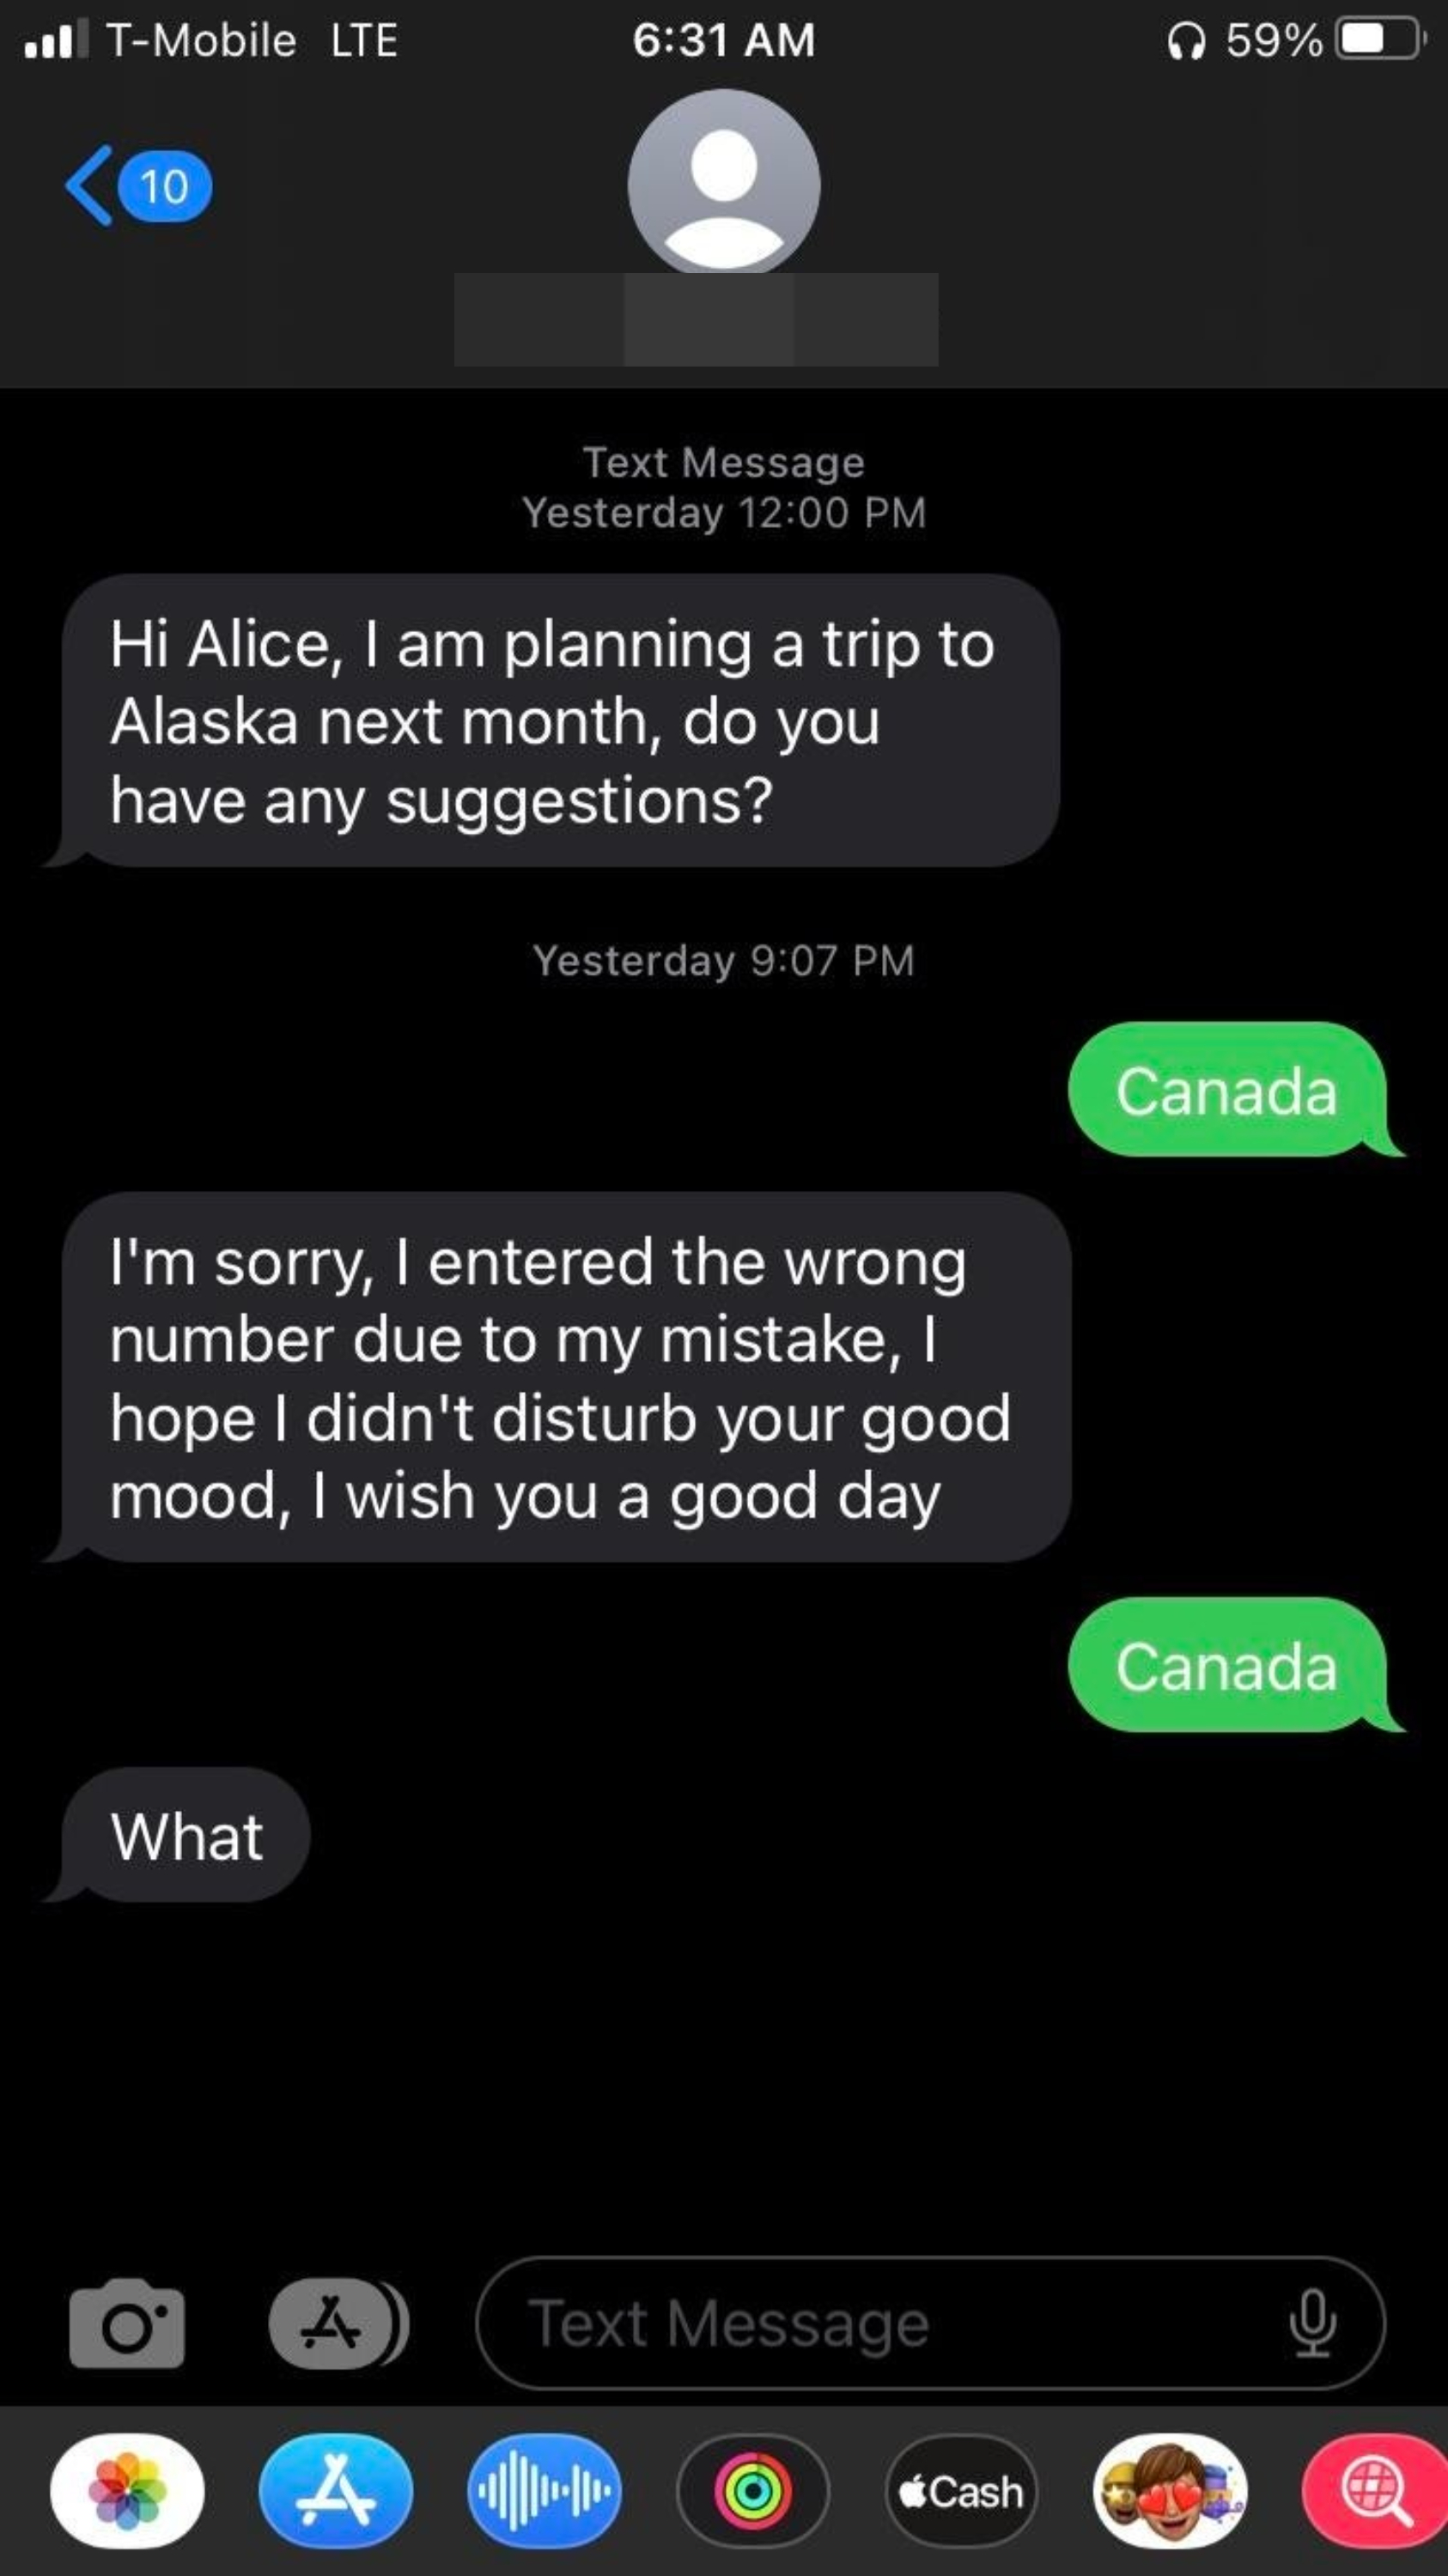 &quot;Hi Alice, I&#x27;m planning a trip to Alaska next month, do you have any suggestions?&quot; Response: &quot;Canada&quot; &quot;I&#x27;m sorry, I entered the wrong number due to my mistake, I hope I didn&#x27;t disturb your good mood, I wish you a good day&quot; Response: &quot;Canada&quot; &quot;What?&quot;